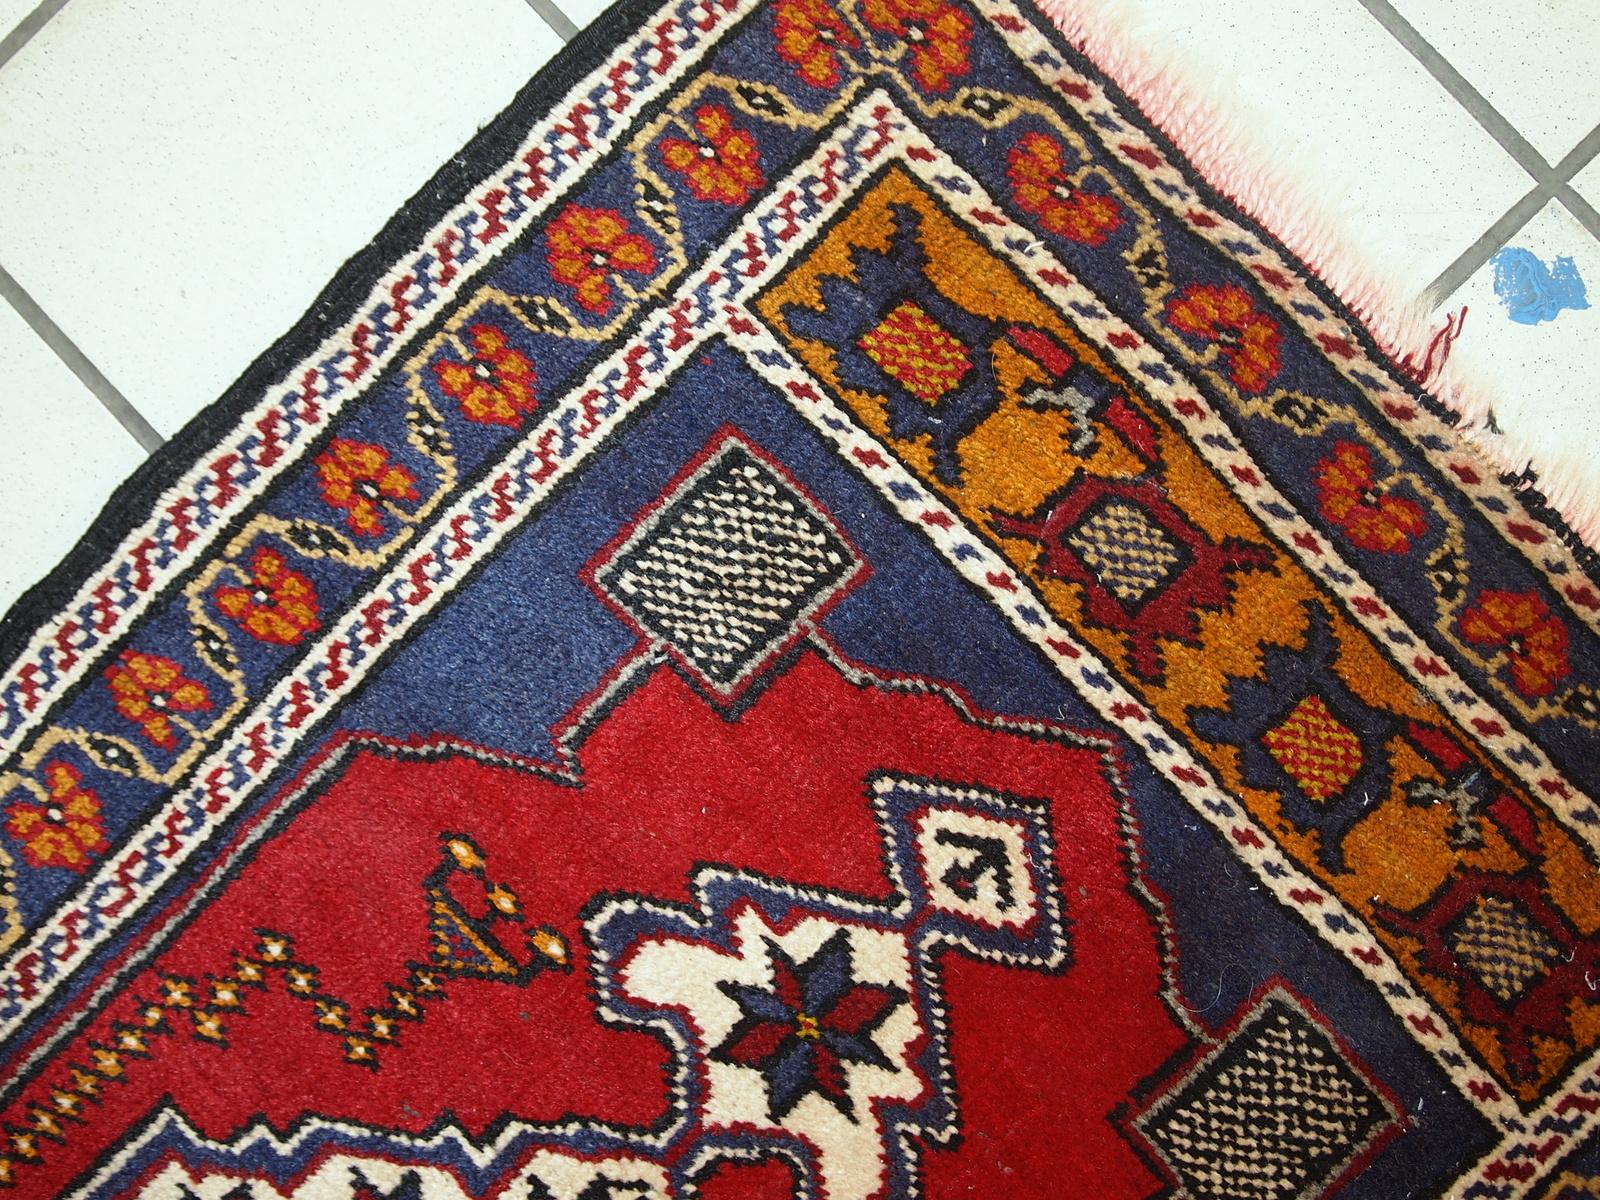 Handmade vintage Turkish Yastik rug in bright red and purple colors. The rug is in original condition from the middle of 20th century, it has some signs of age.

?-condition: original, some signs of age,

-circa: 1960s,

-size: 1.8' x 3.6'